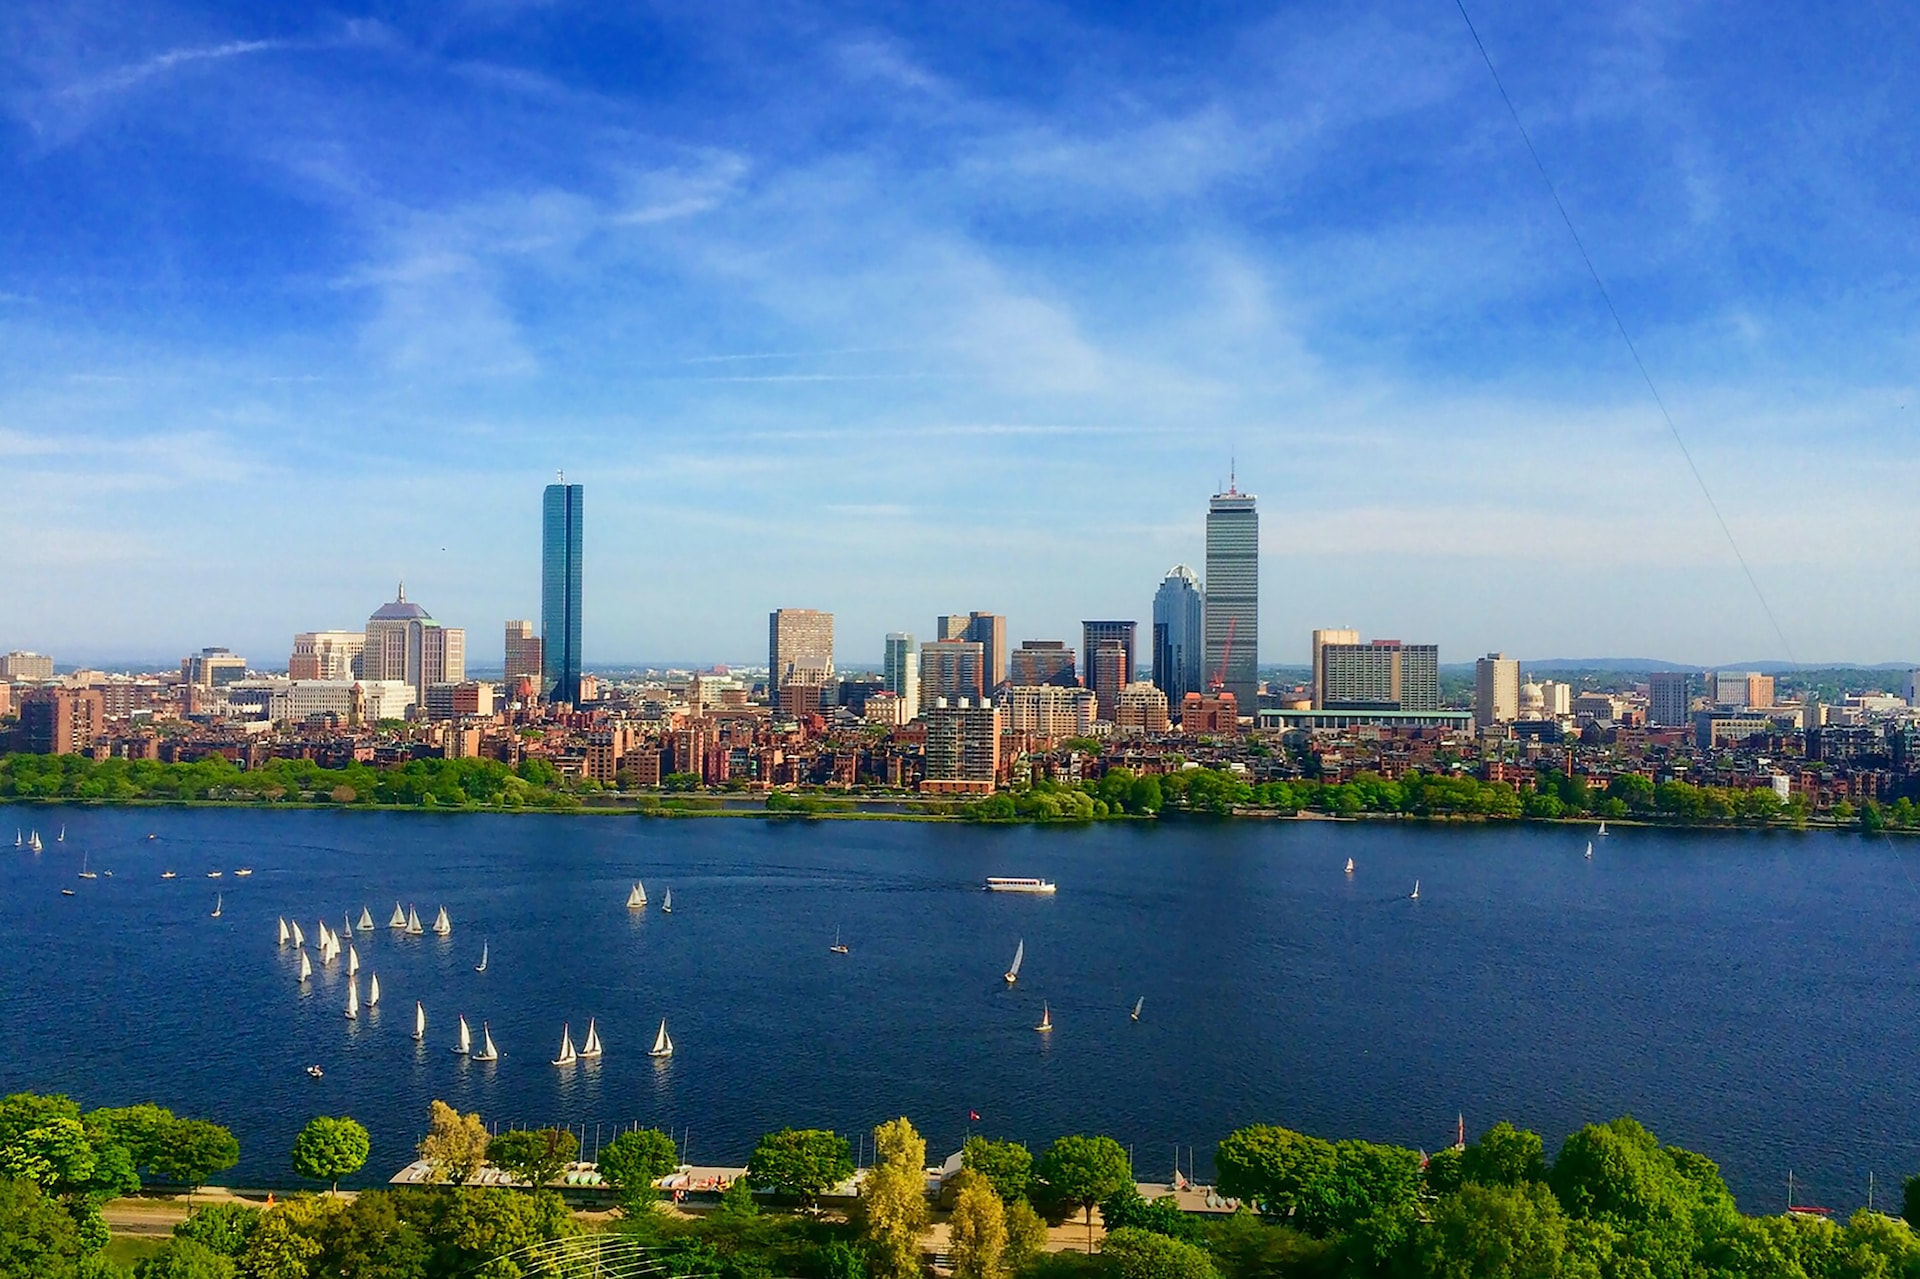 A view of downtown Boston in the state of Massachusetts showcasing numerous towering buildings and the great Charles River in the foreground.